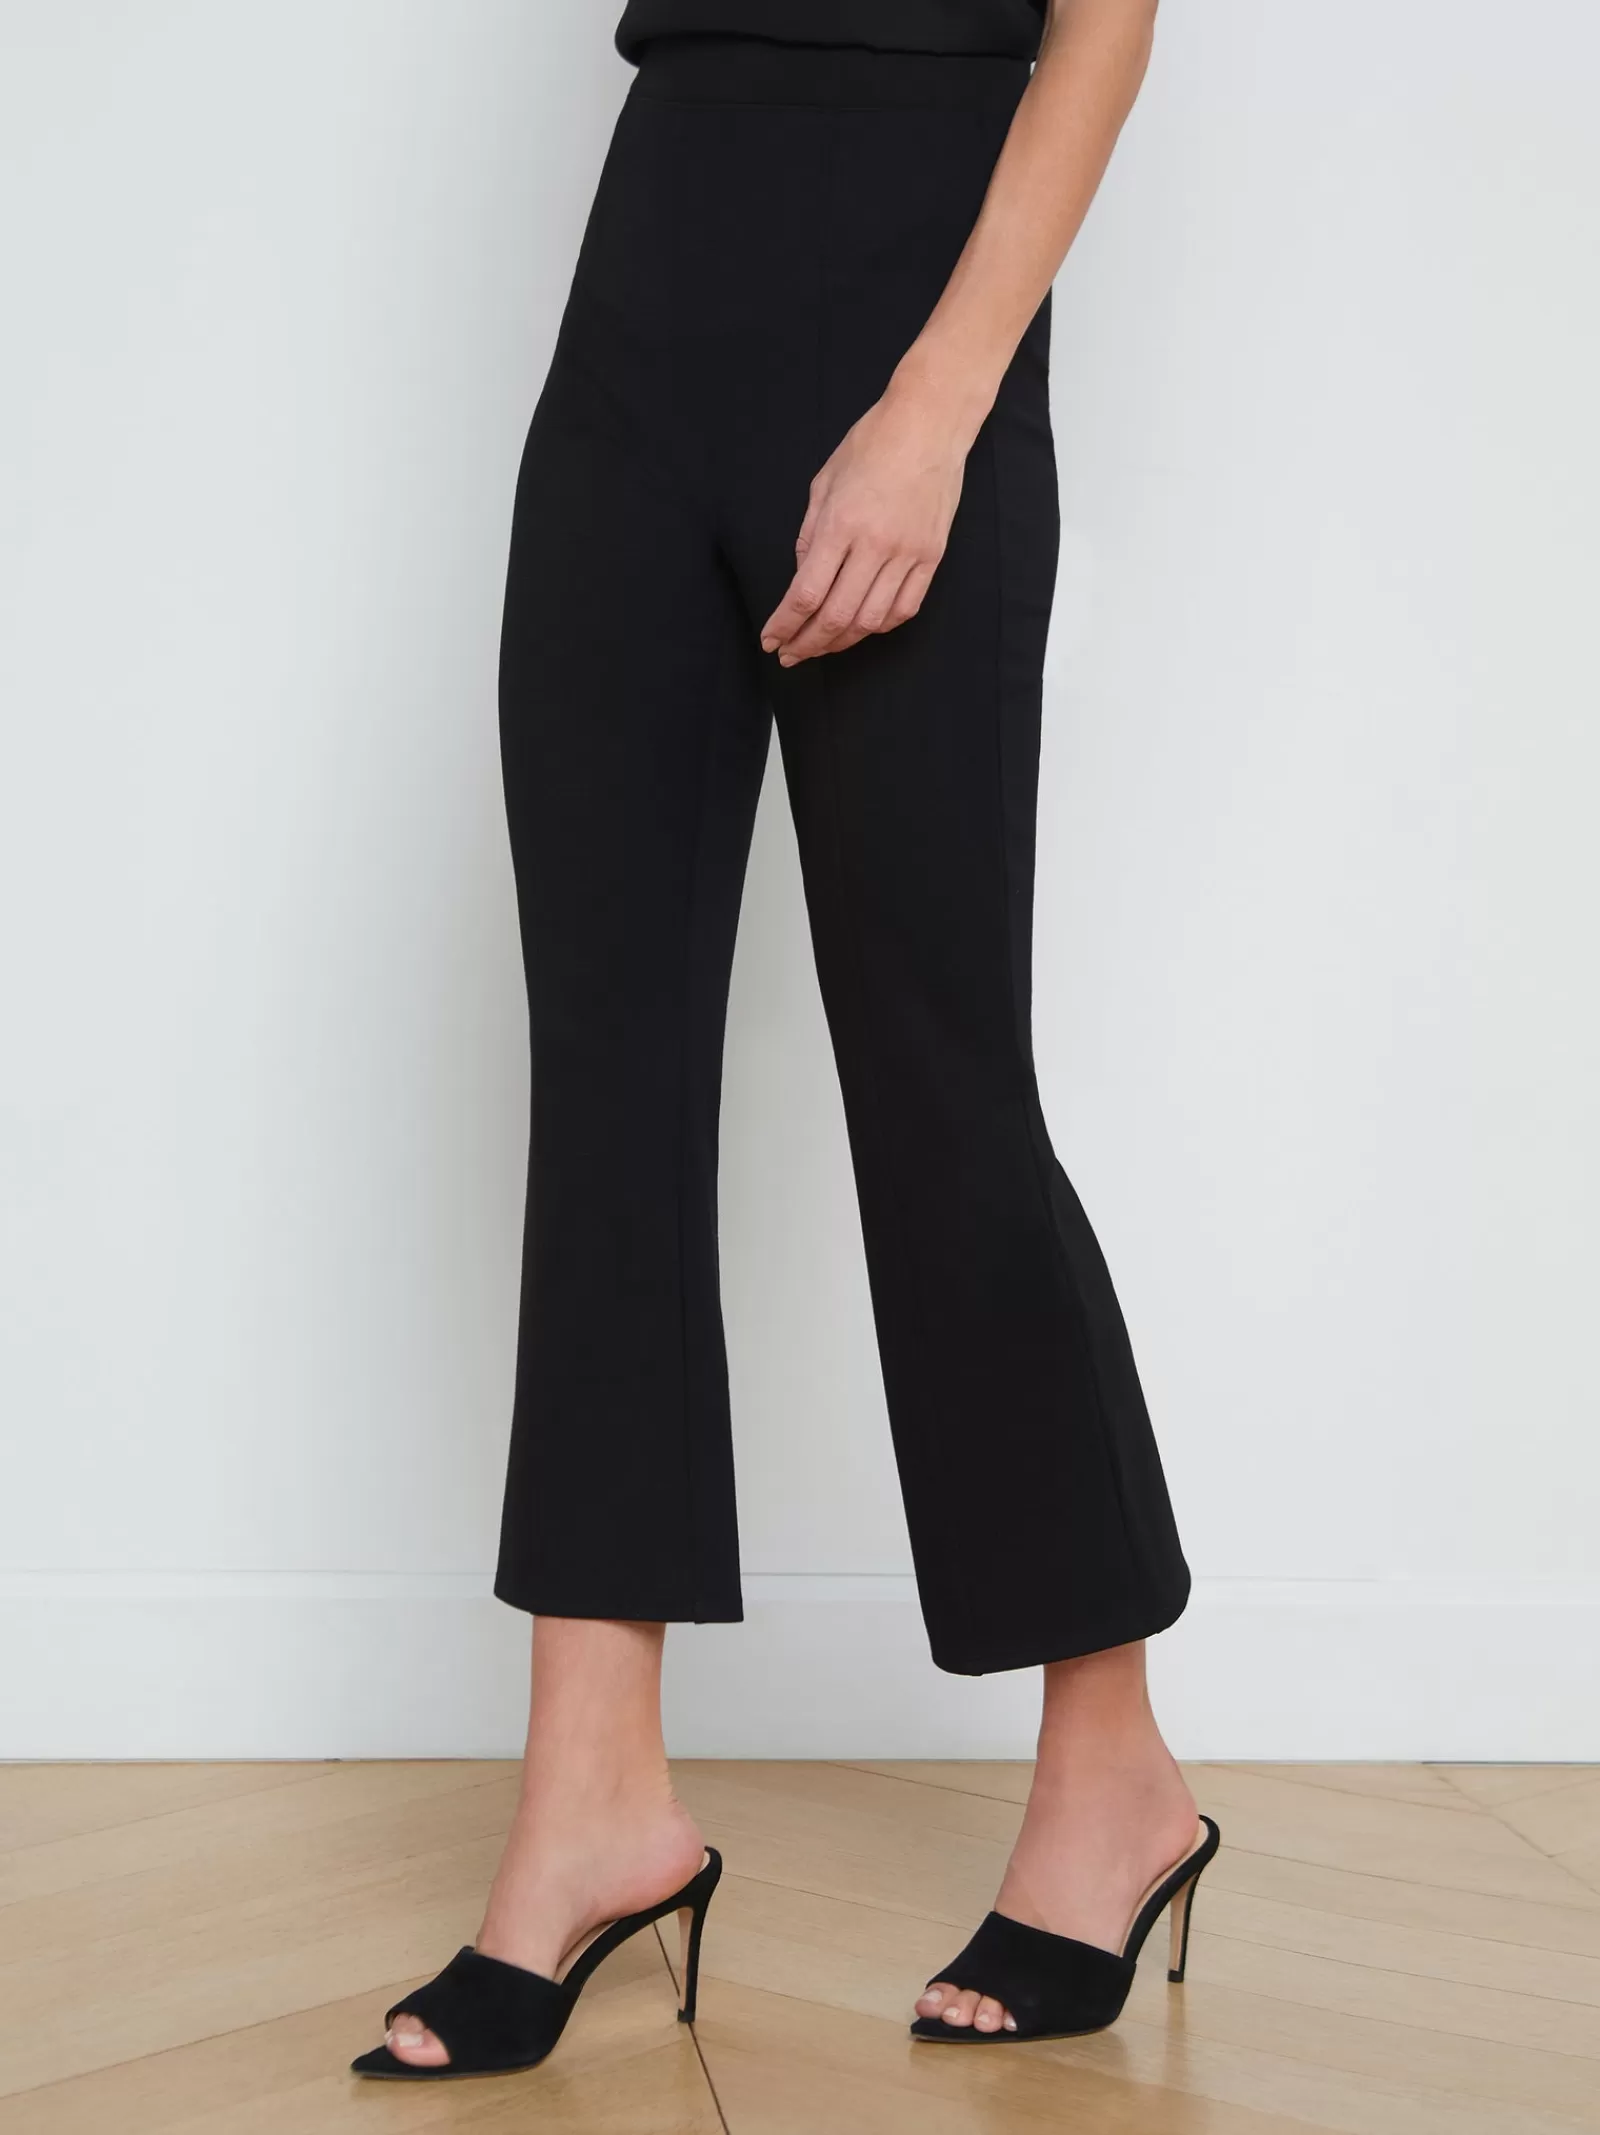 L'AGENCE Kayden Pull-On Kick Flare Pant< All Things Black | Sets